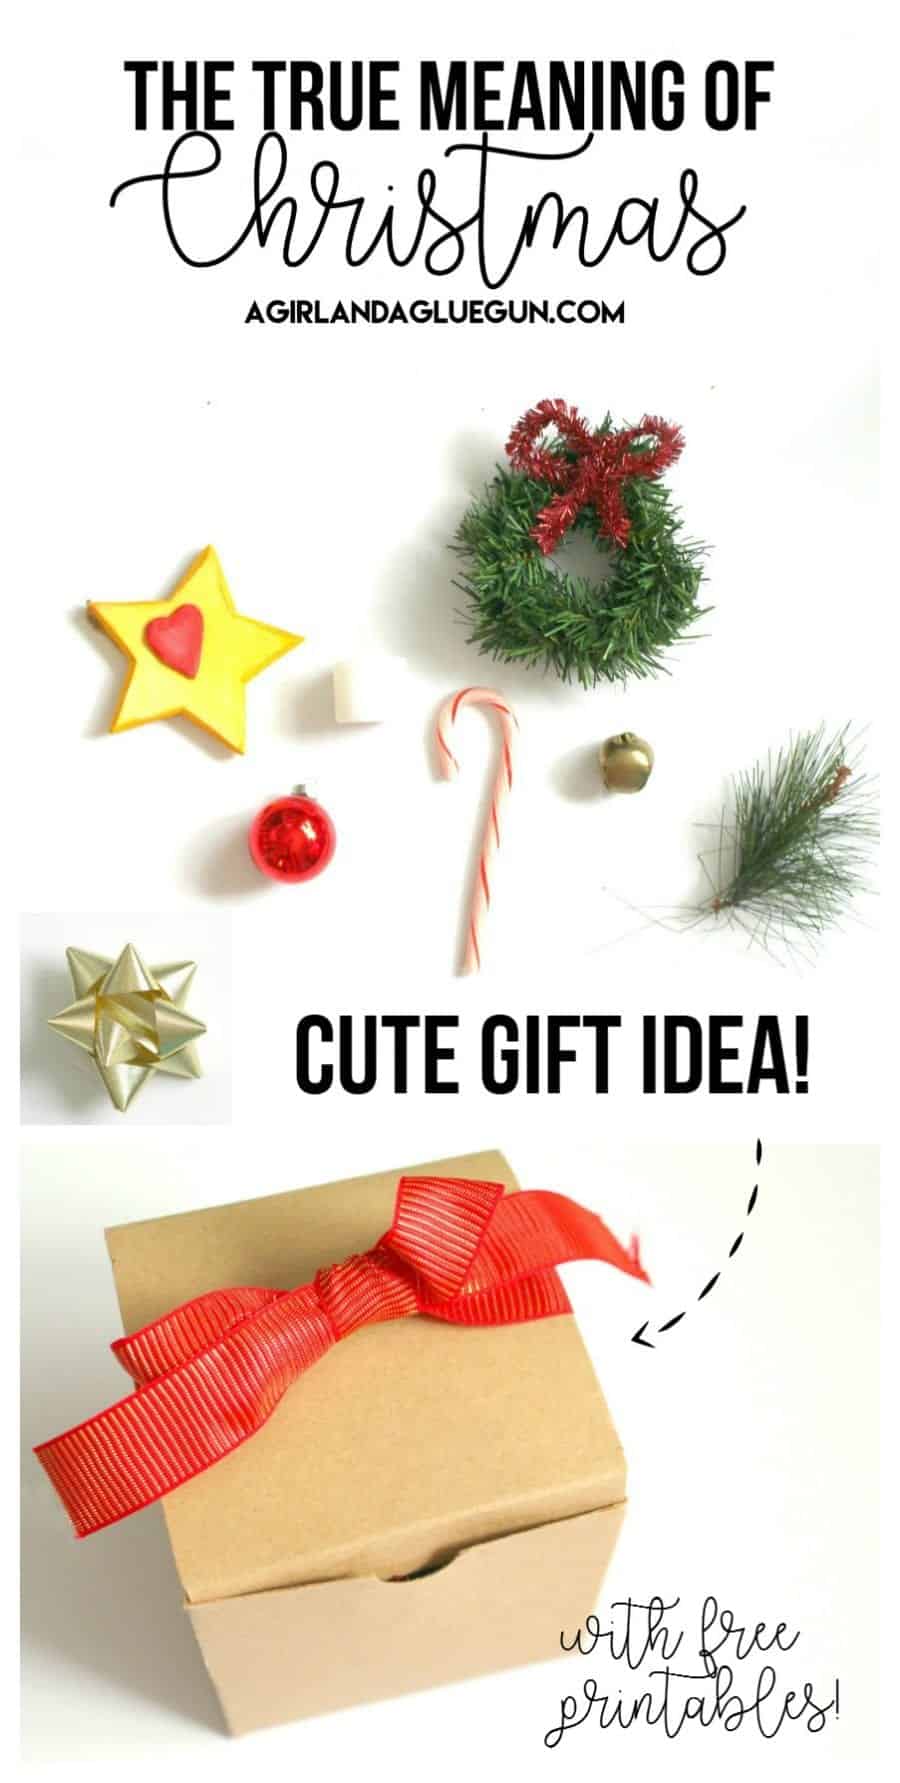 gift-idea-for-the-true-meaning-of-christmas